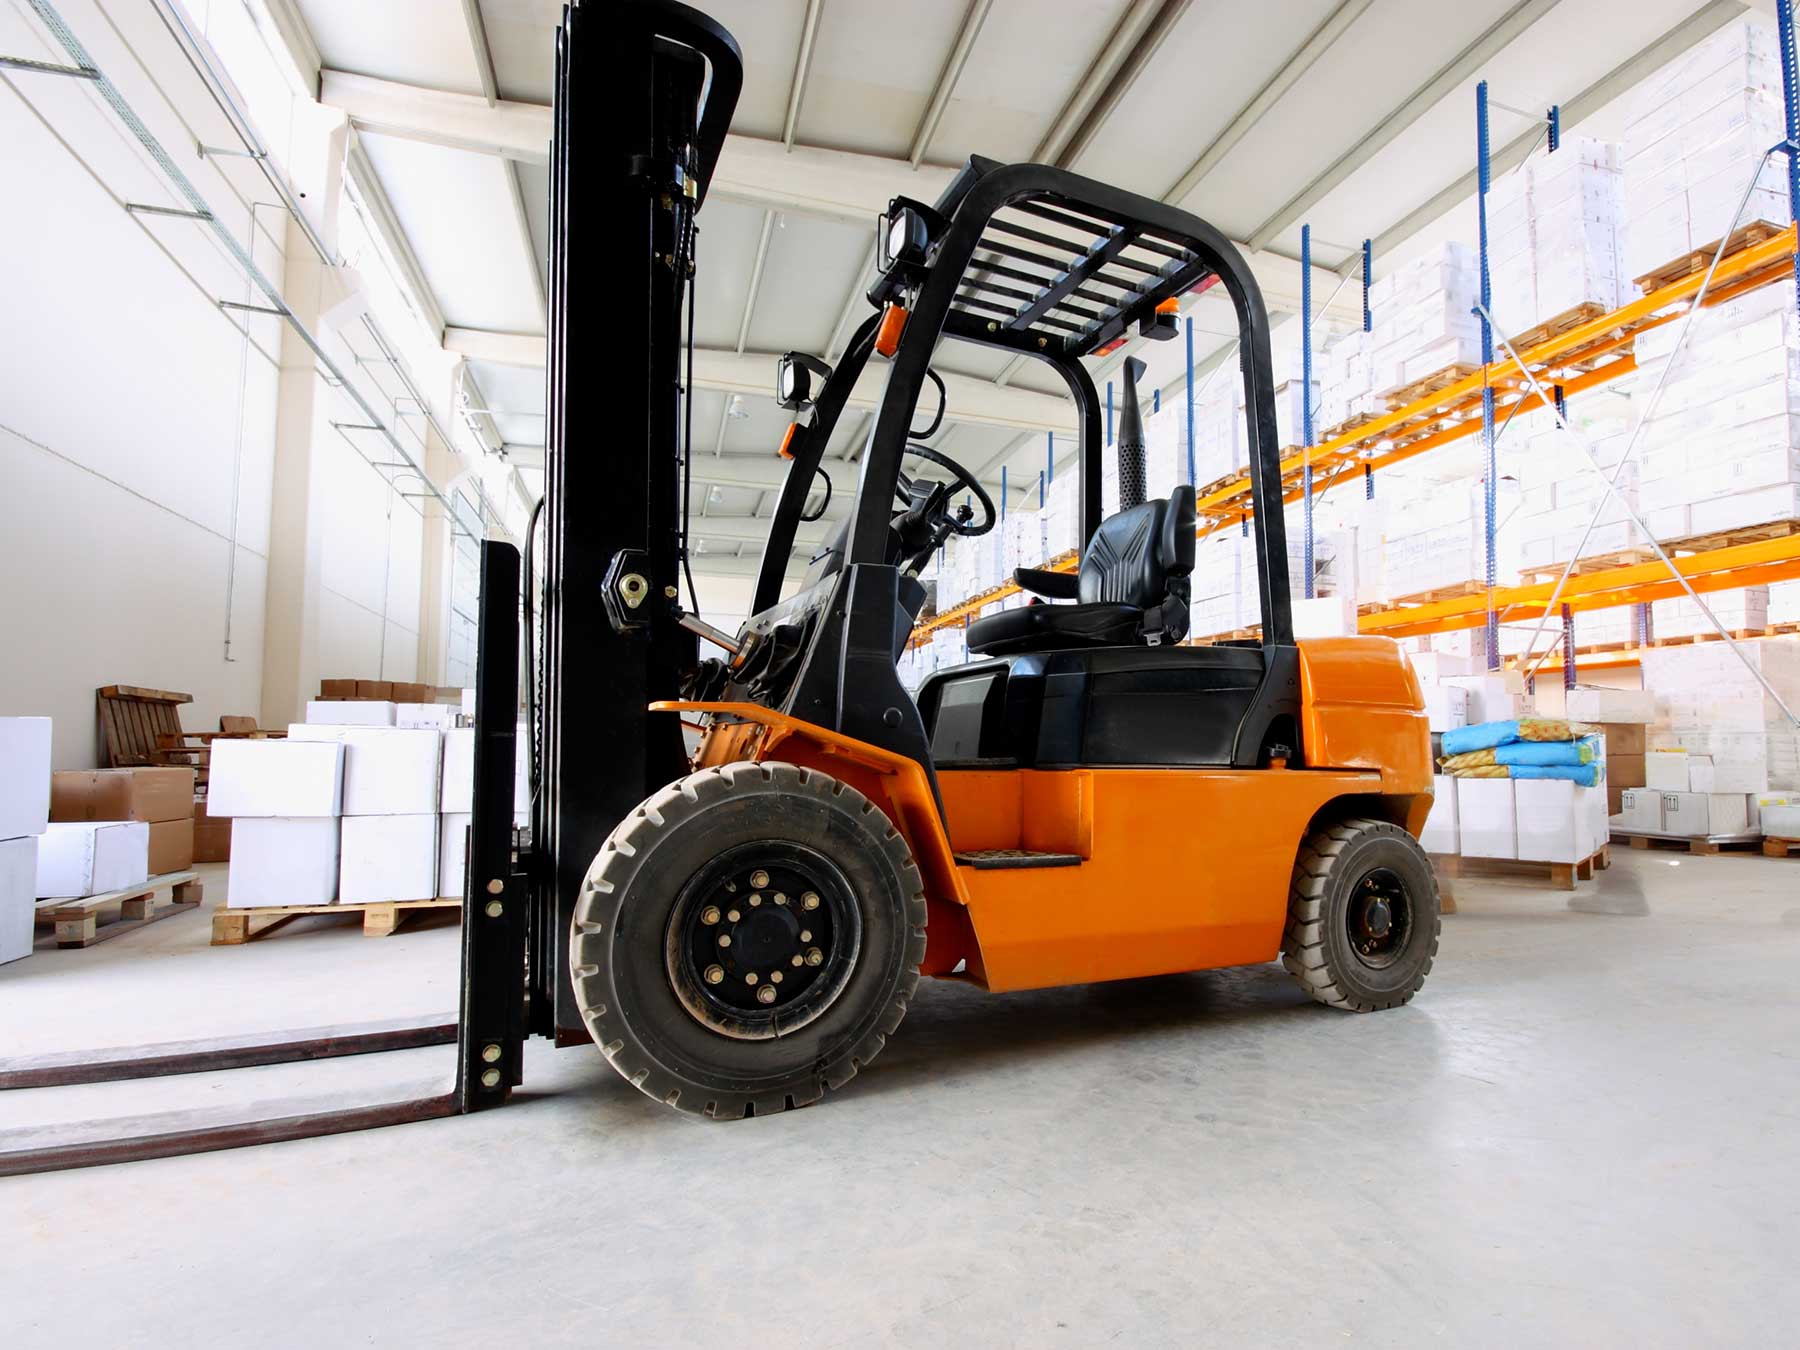 Forklift Parts 101 – Common Parts and Terms